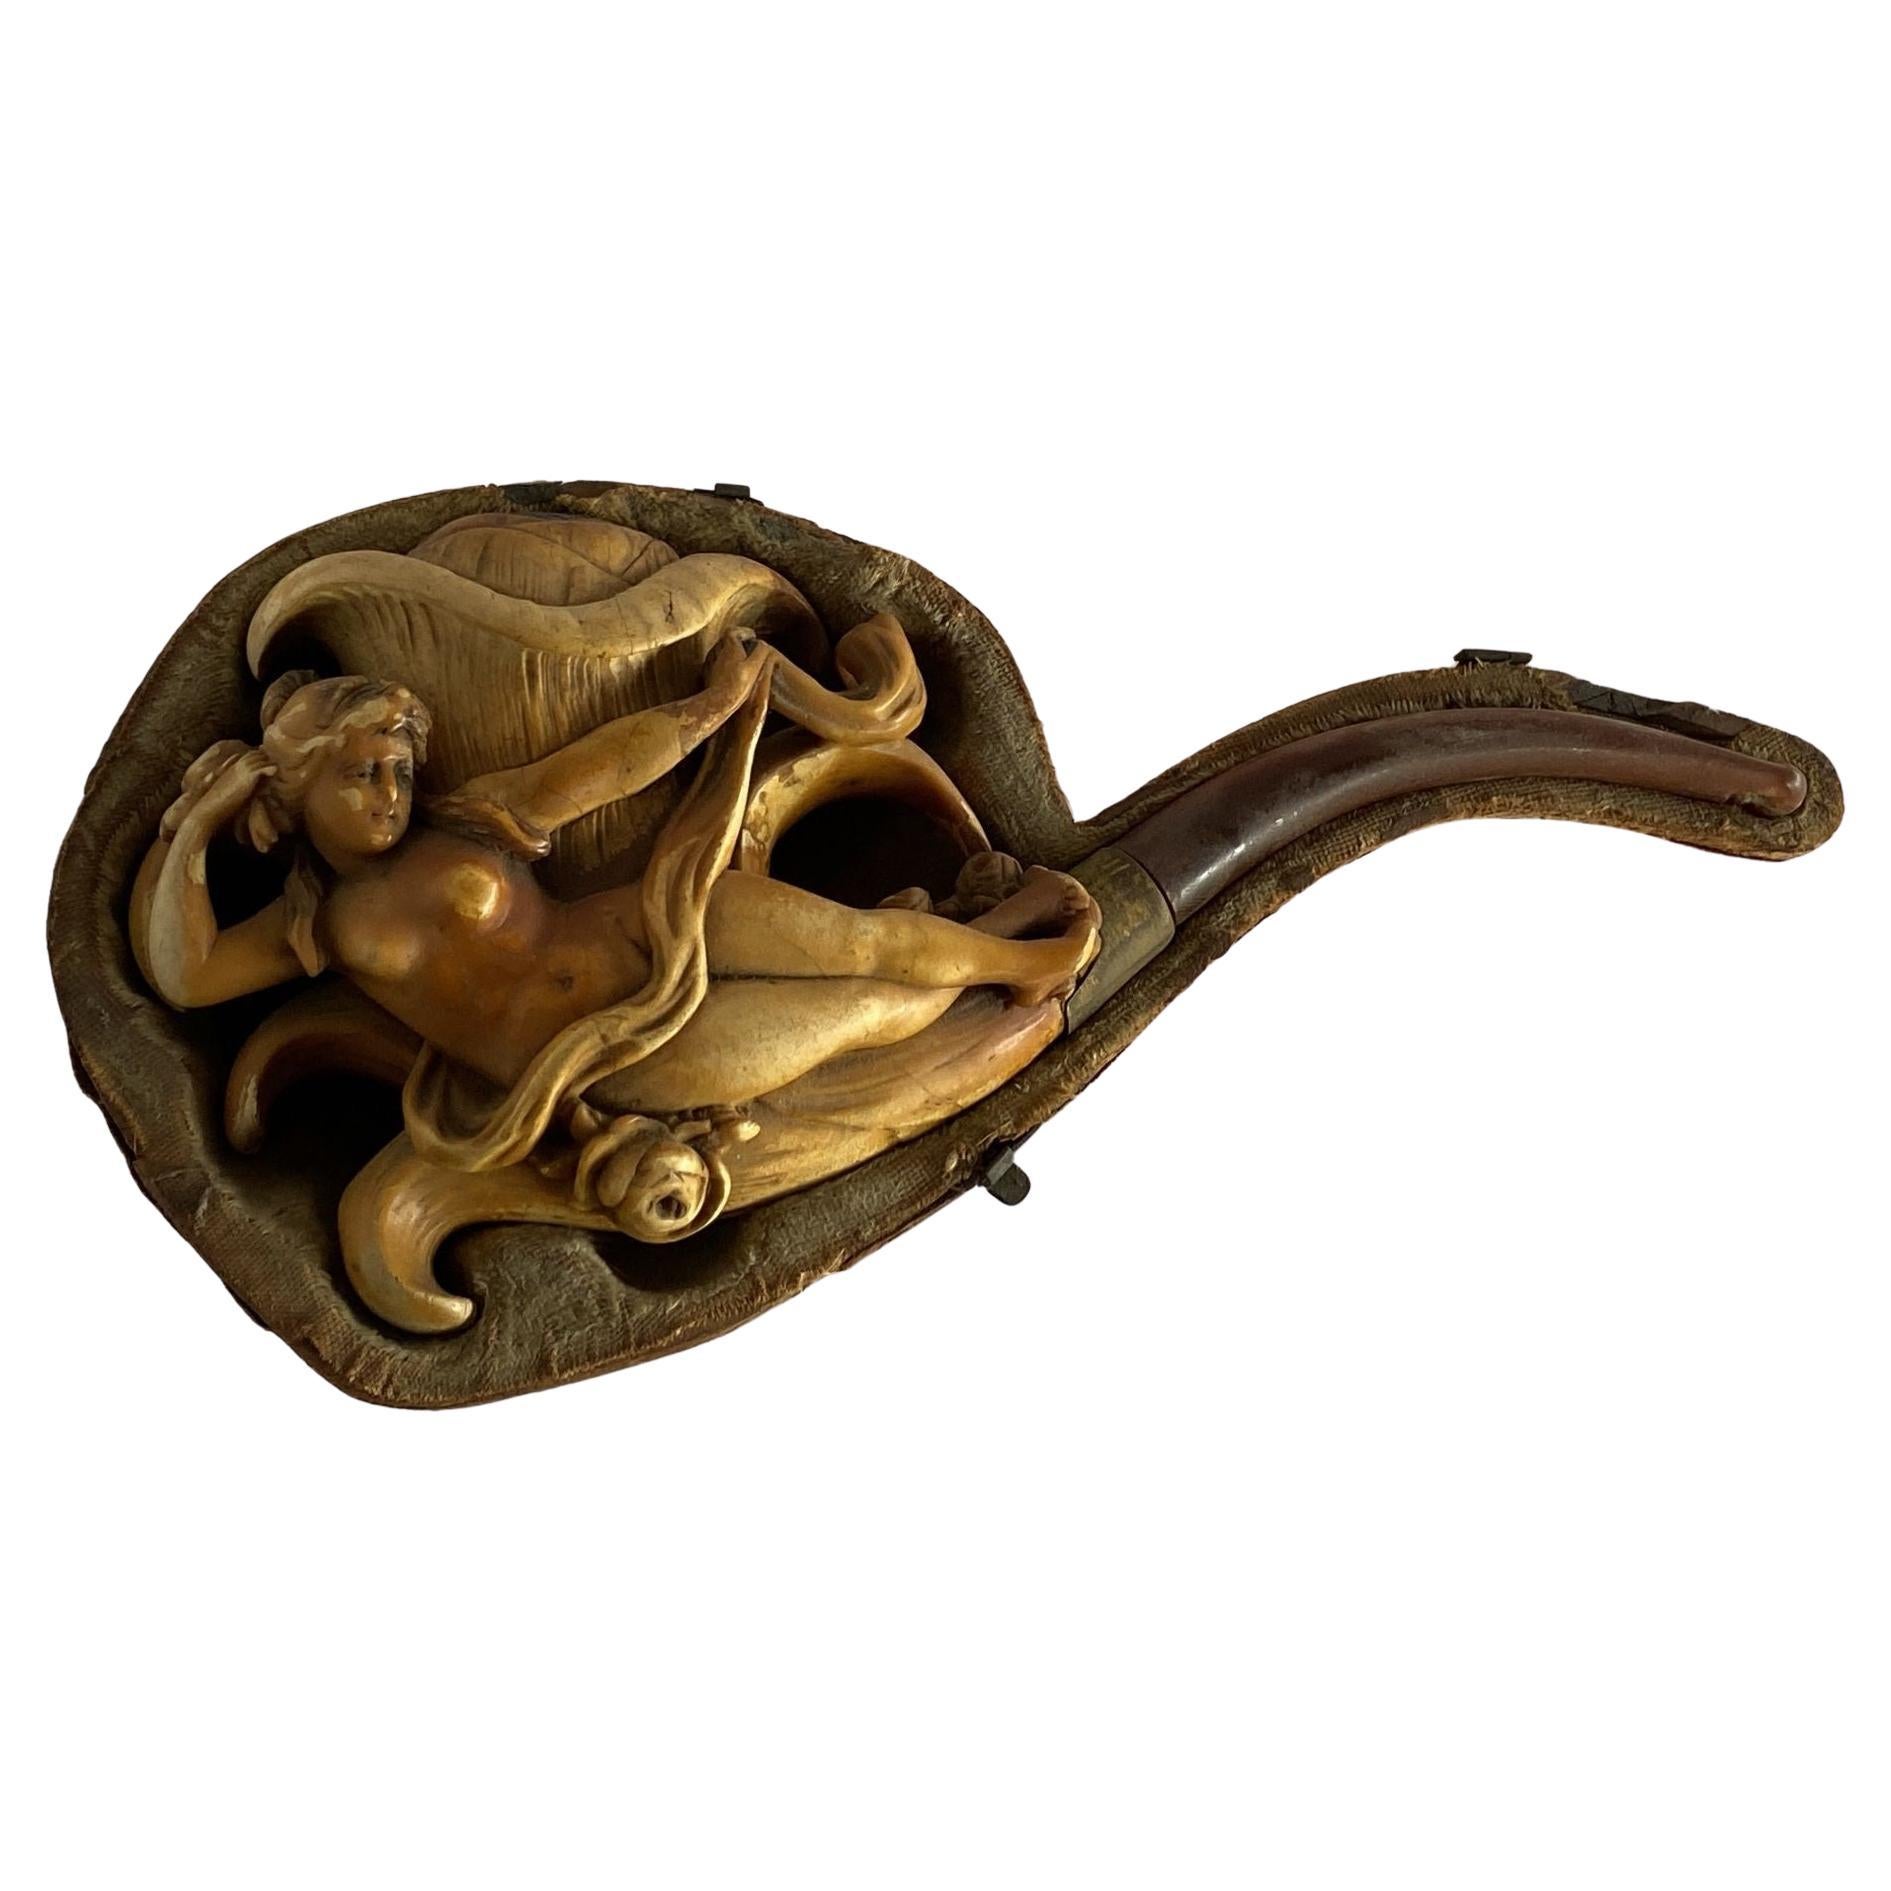 Rare Carved Hand Nude Goddess Meerschaum Pipe in Case, Circa 1890